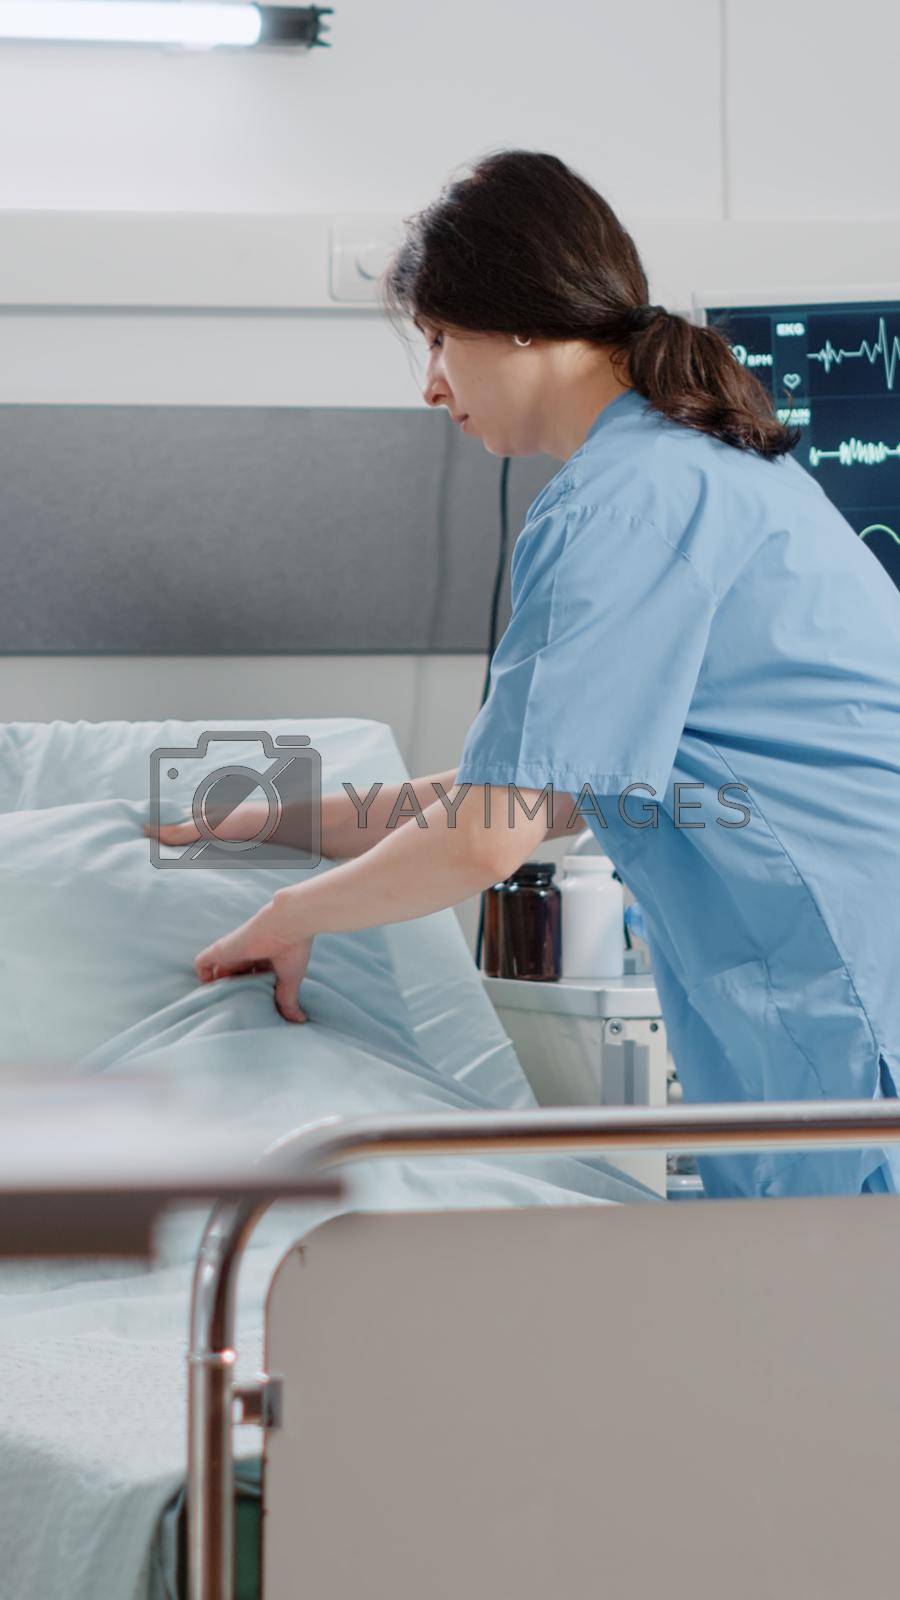 Woman nurse making bed in hospital ward for healthcare treatment and recovery. Medical assistant preparing reanimation room with oxygen tube and heart rate monitor for patient.